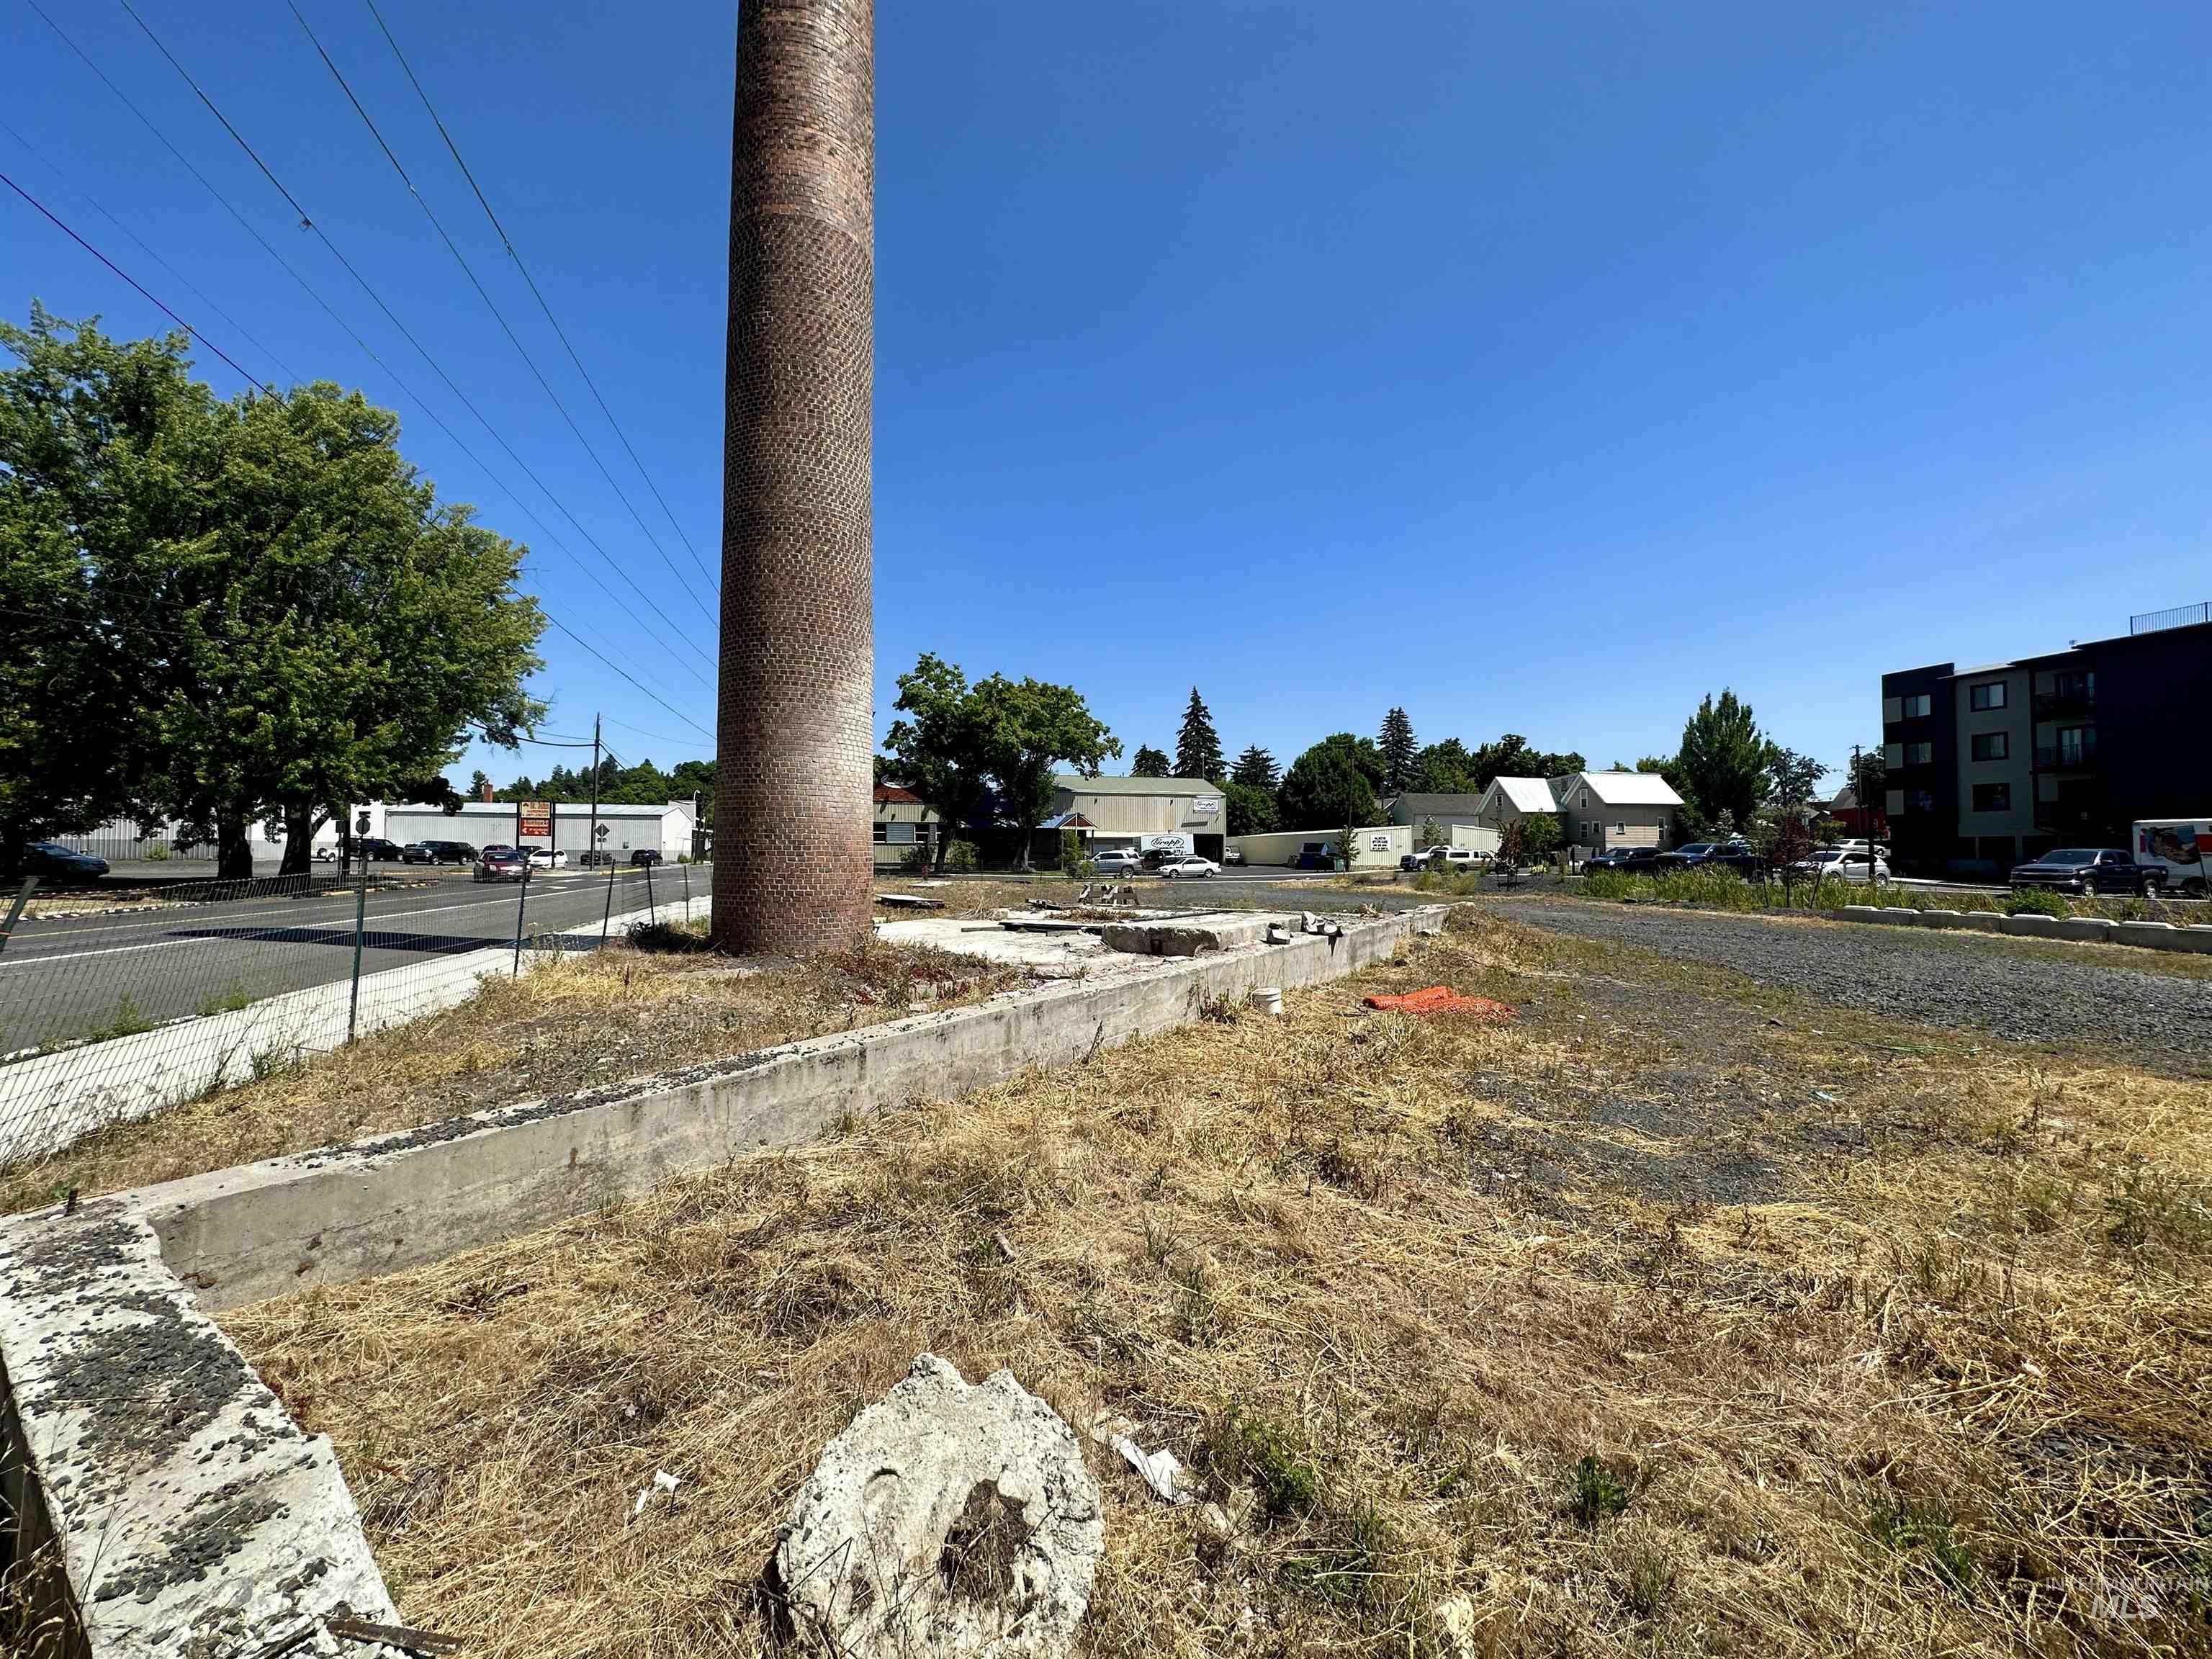 123 N Almon, Moscow, Idaho 83843, Land For Sale, Price $350,000,MLS 98883419